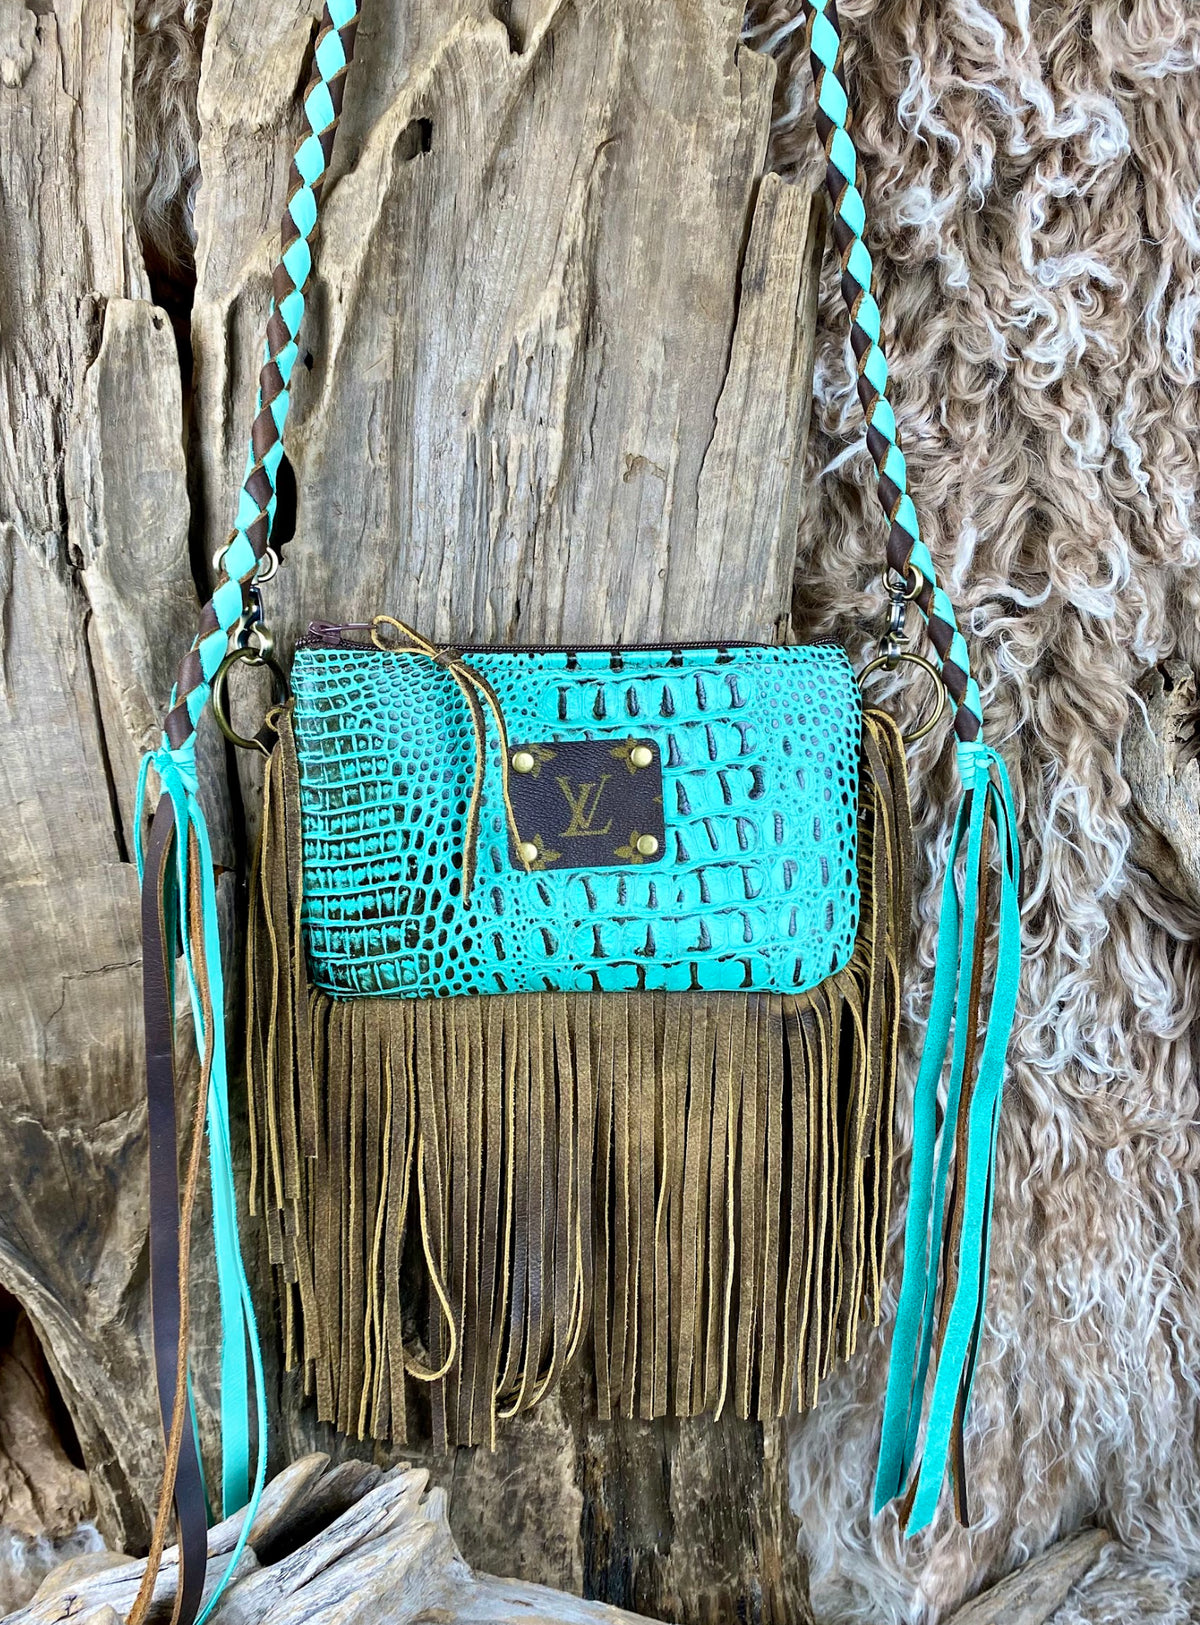 Upcycled Fiesta Olive Braid Strap - Turquoise Croc